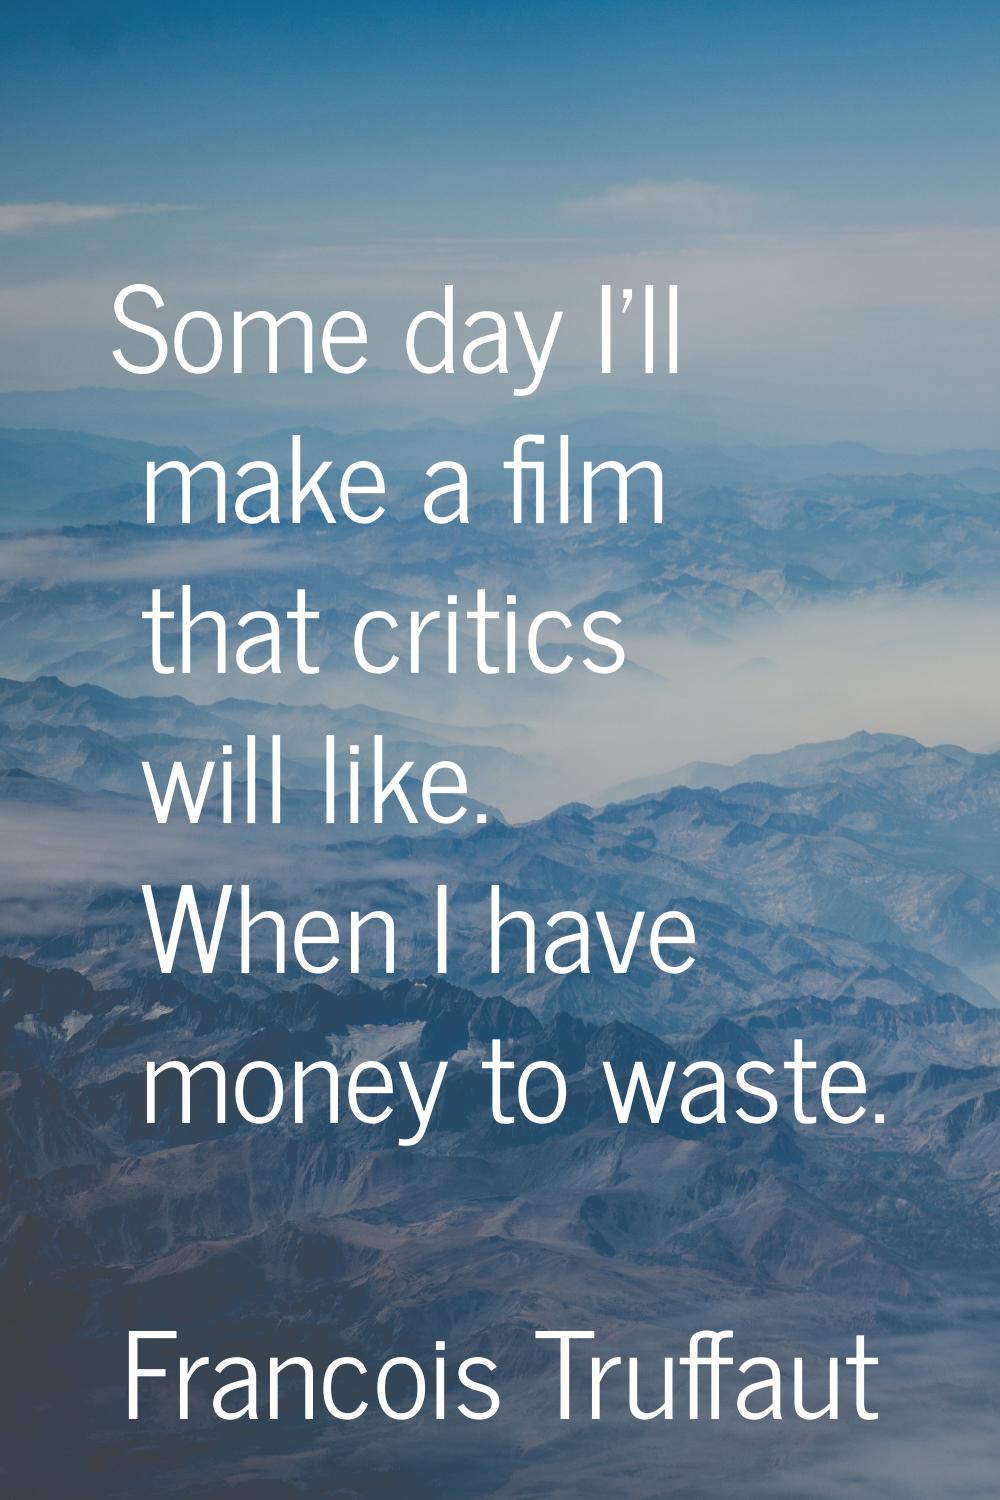 Some day I'll make a film that critics will like. When I have money to waste.